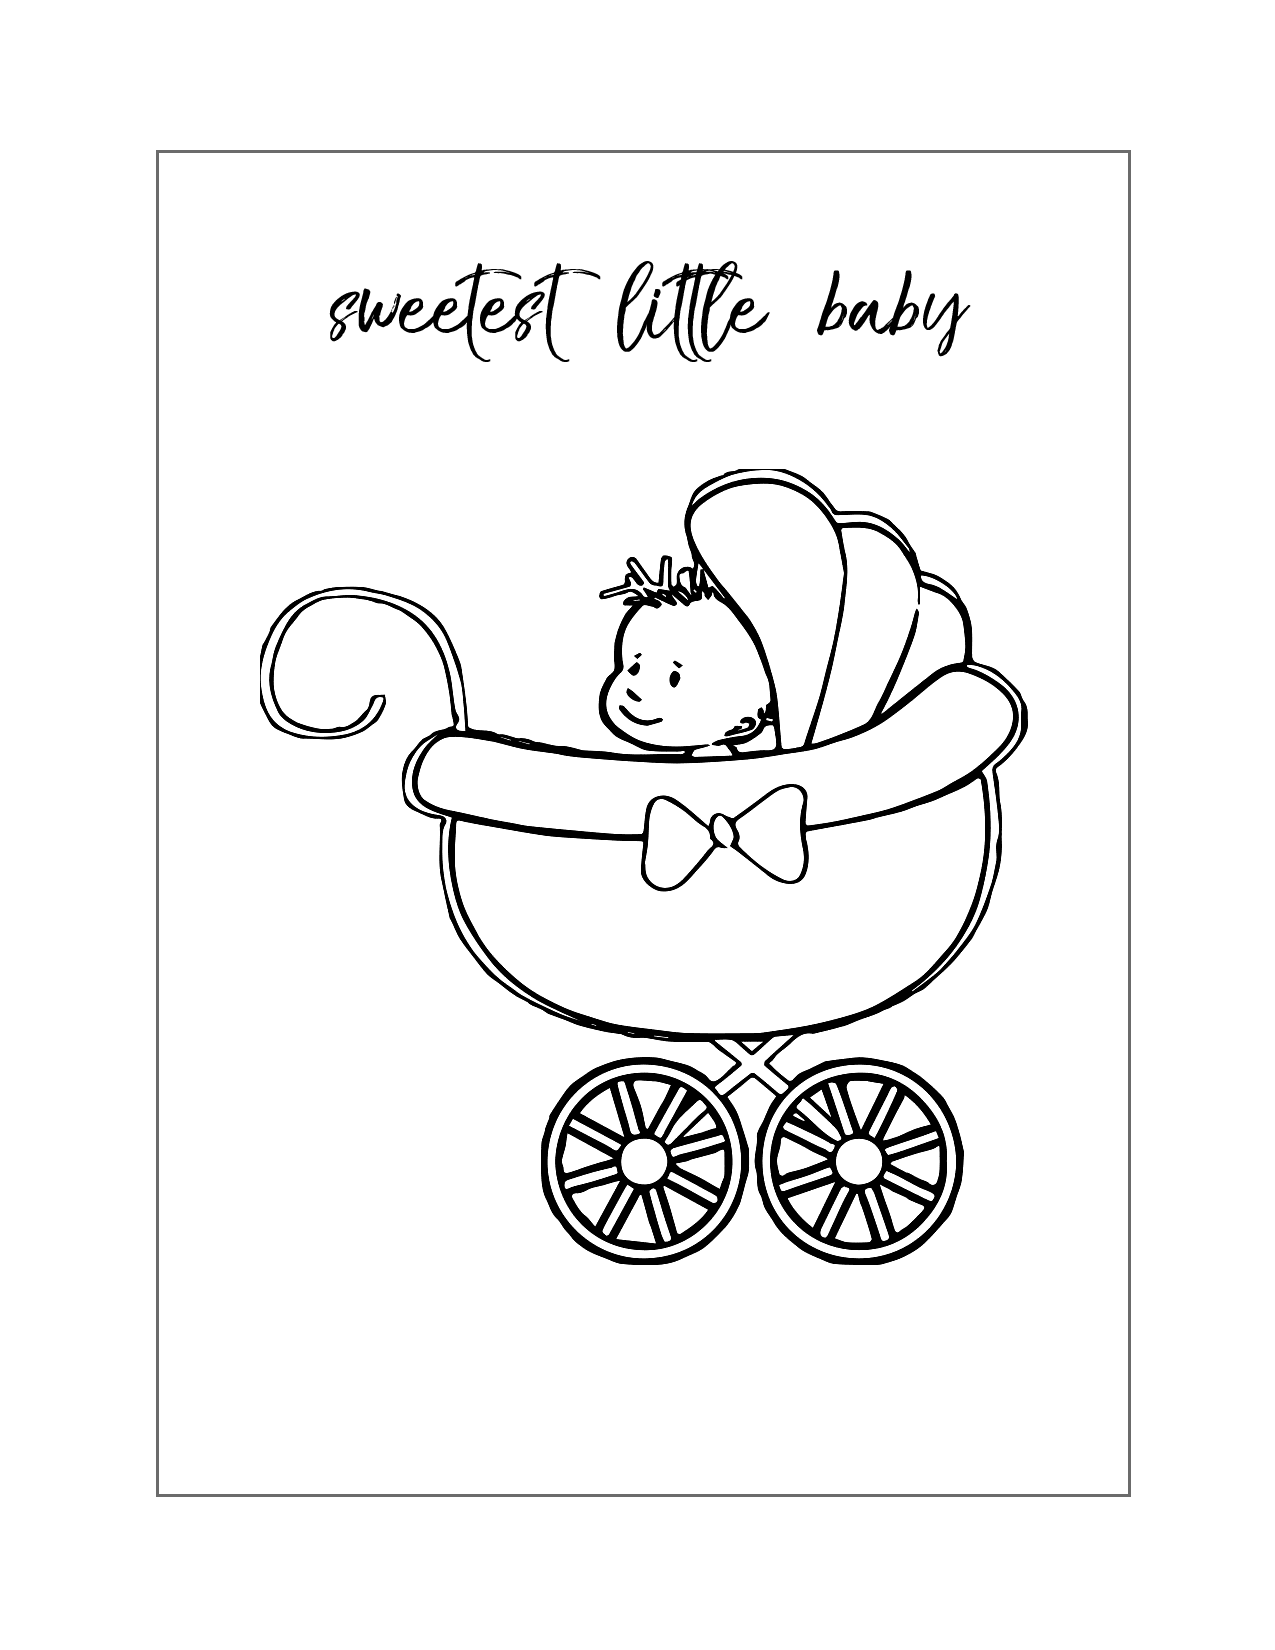 Sweetest Little Baby In A Stroller Coloring Page